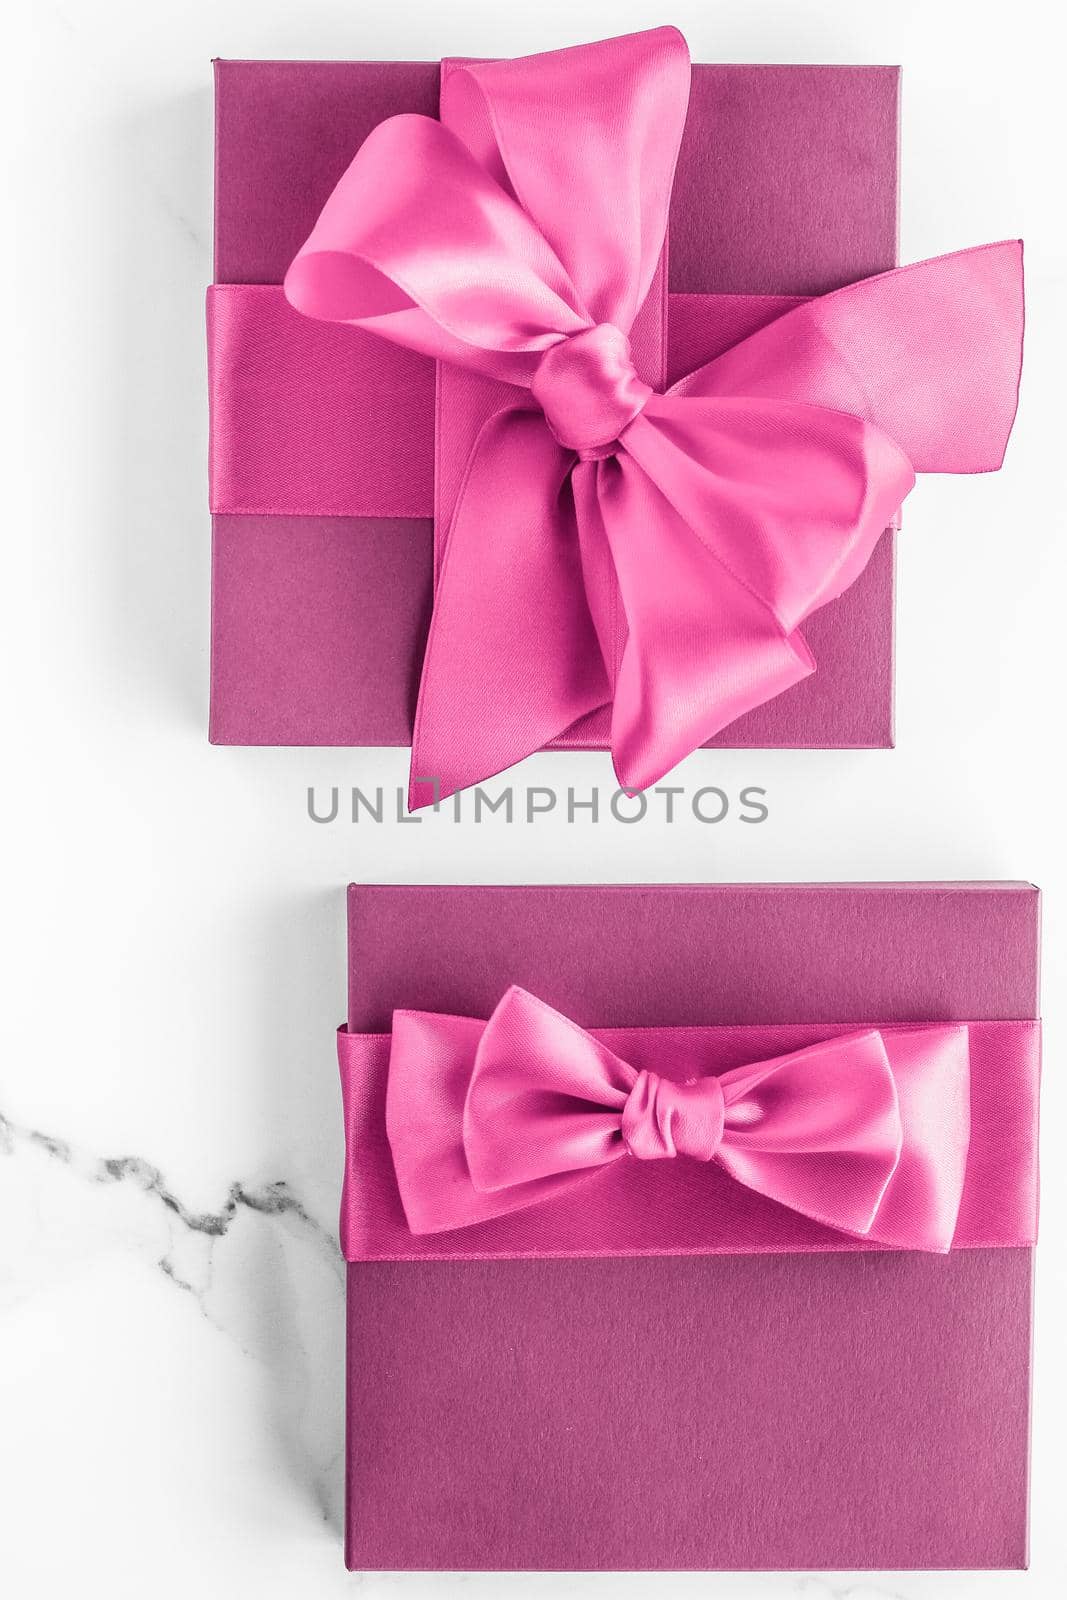 Pink gift box with silk bow on marble background, girl baby shower present and glamour fashion gift for luxury beauty brand, holiday flatlay art design by Anneleven